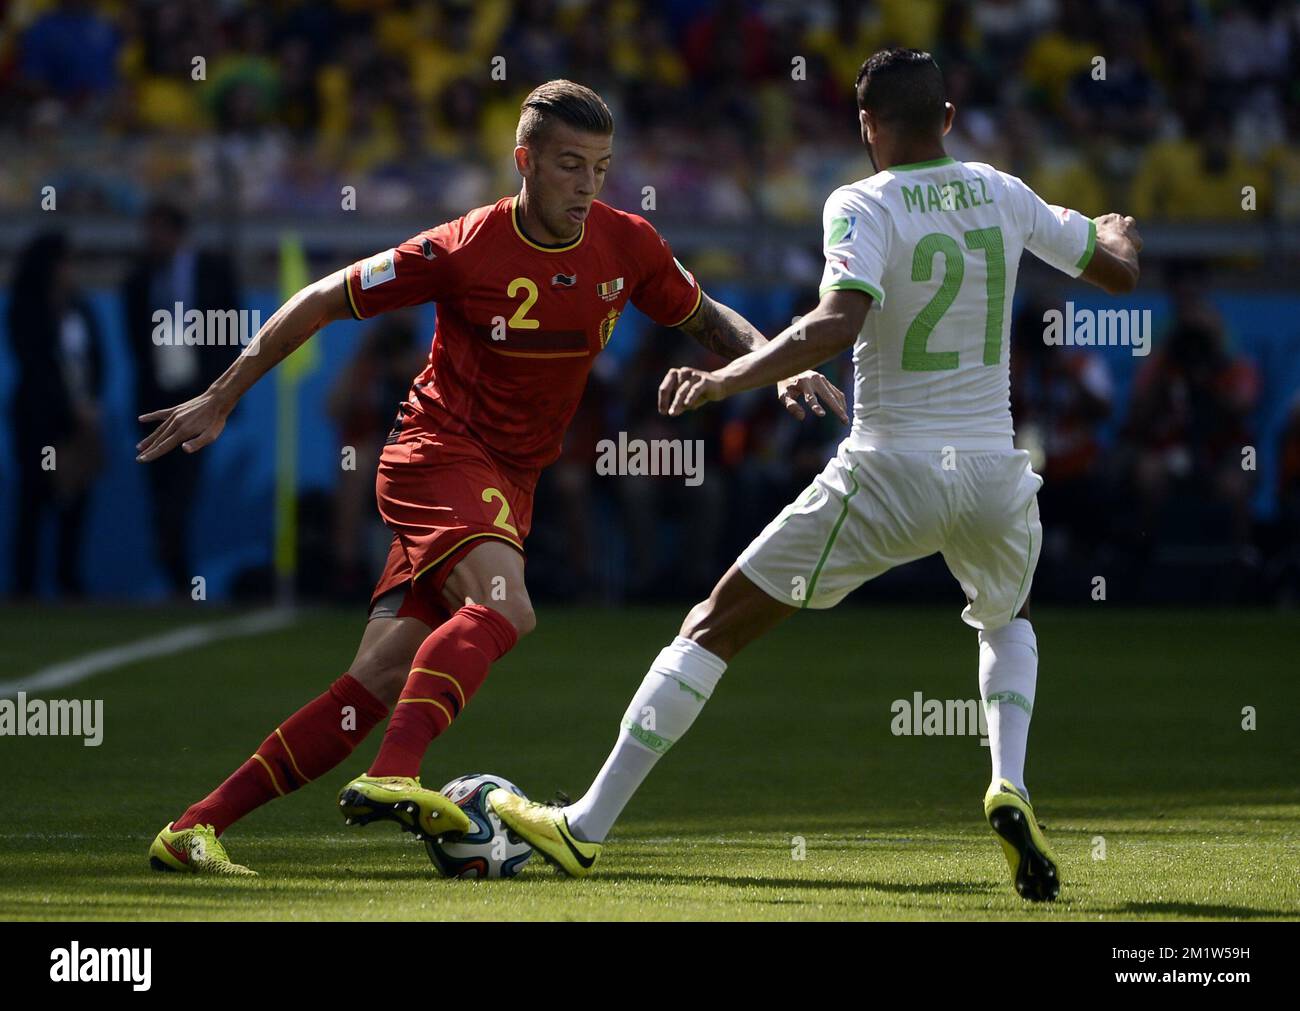 Belgium's Toby Alderweireld and Algeria's Riyad Mahrez fight for the ball during a soccer game between Belgian national team The Red Devils and Algeria in Belo Horizonte, Brazil, the first game in Group H of the first round of the 2014 FIFA World Cup, Tuesday 17 June 2014.  Stock Photo